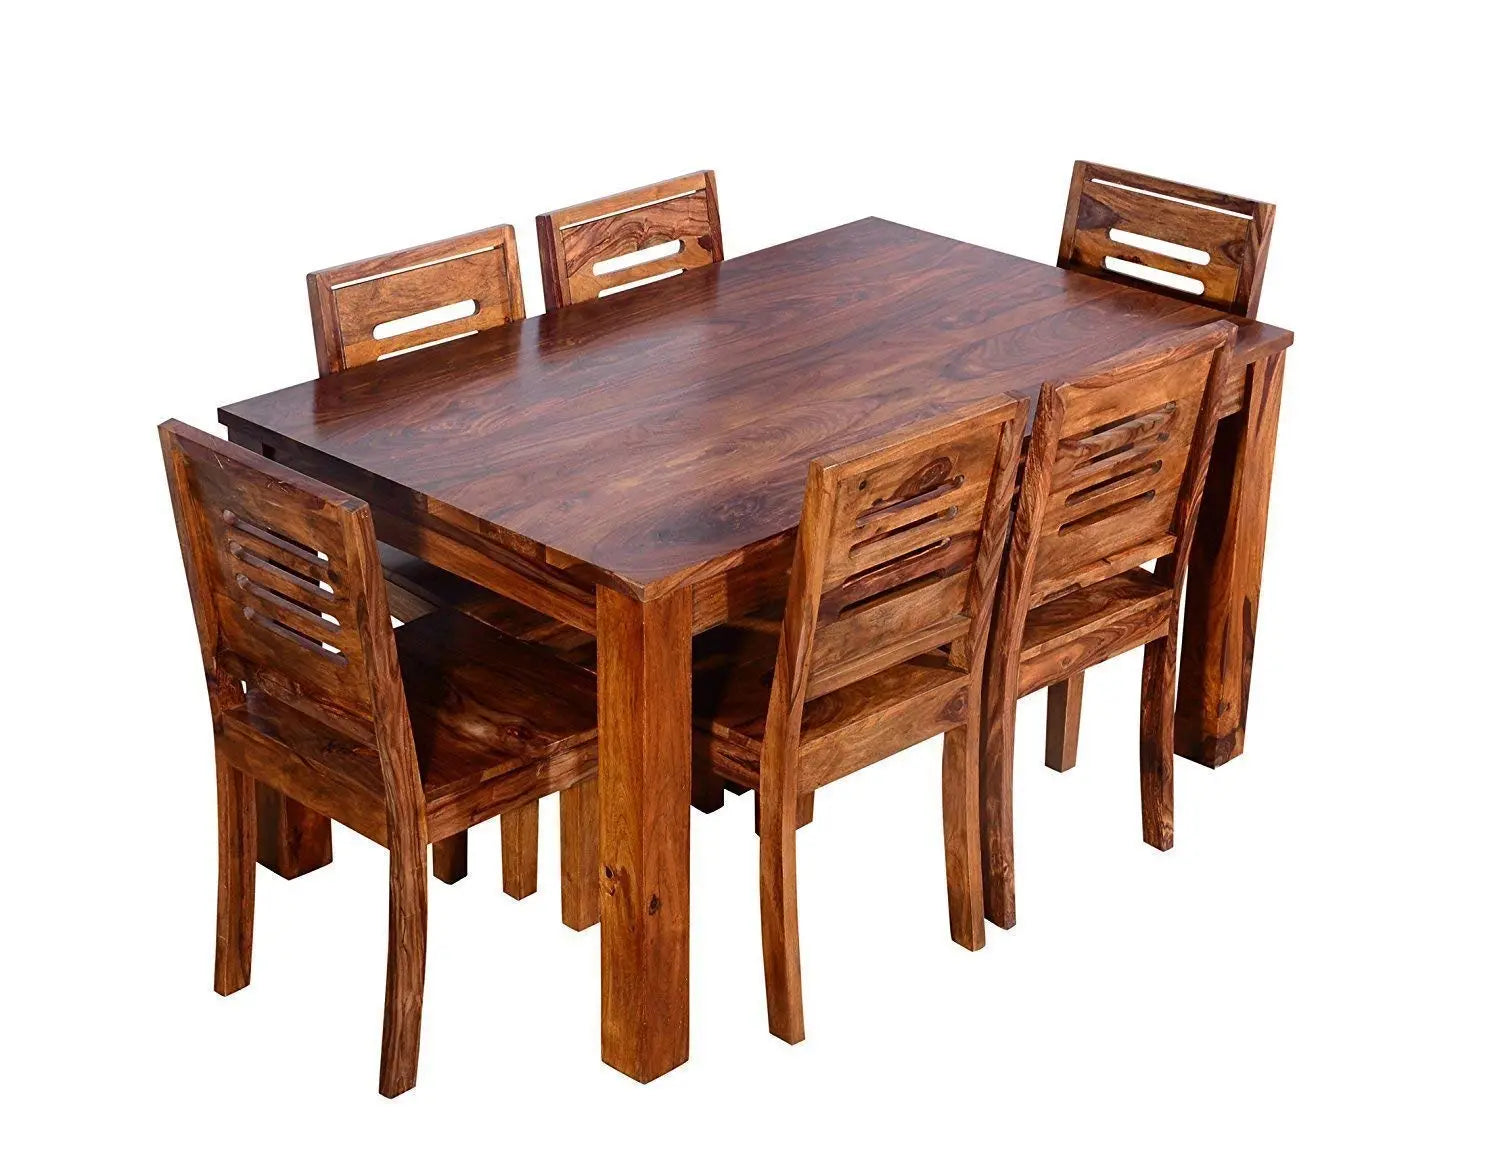 Dining Set Levy- Wooden Dining Table 6 Seater | Six Seater Dinning Table with 6 Chairs for Home | Dining Room Sets for Restraunts | Sheesham Wood, Teak Brown Finish Furneez